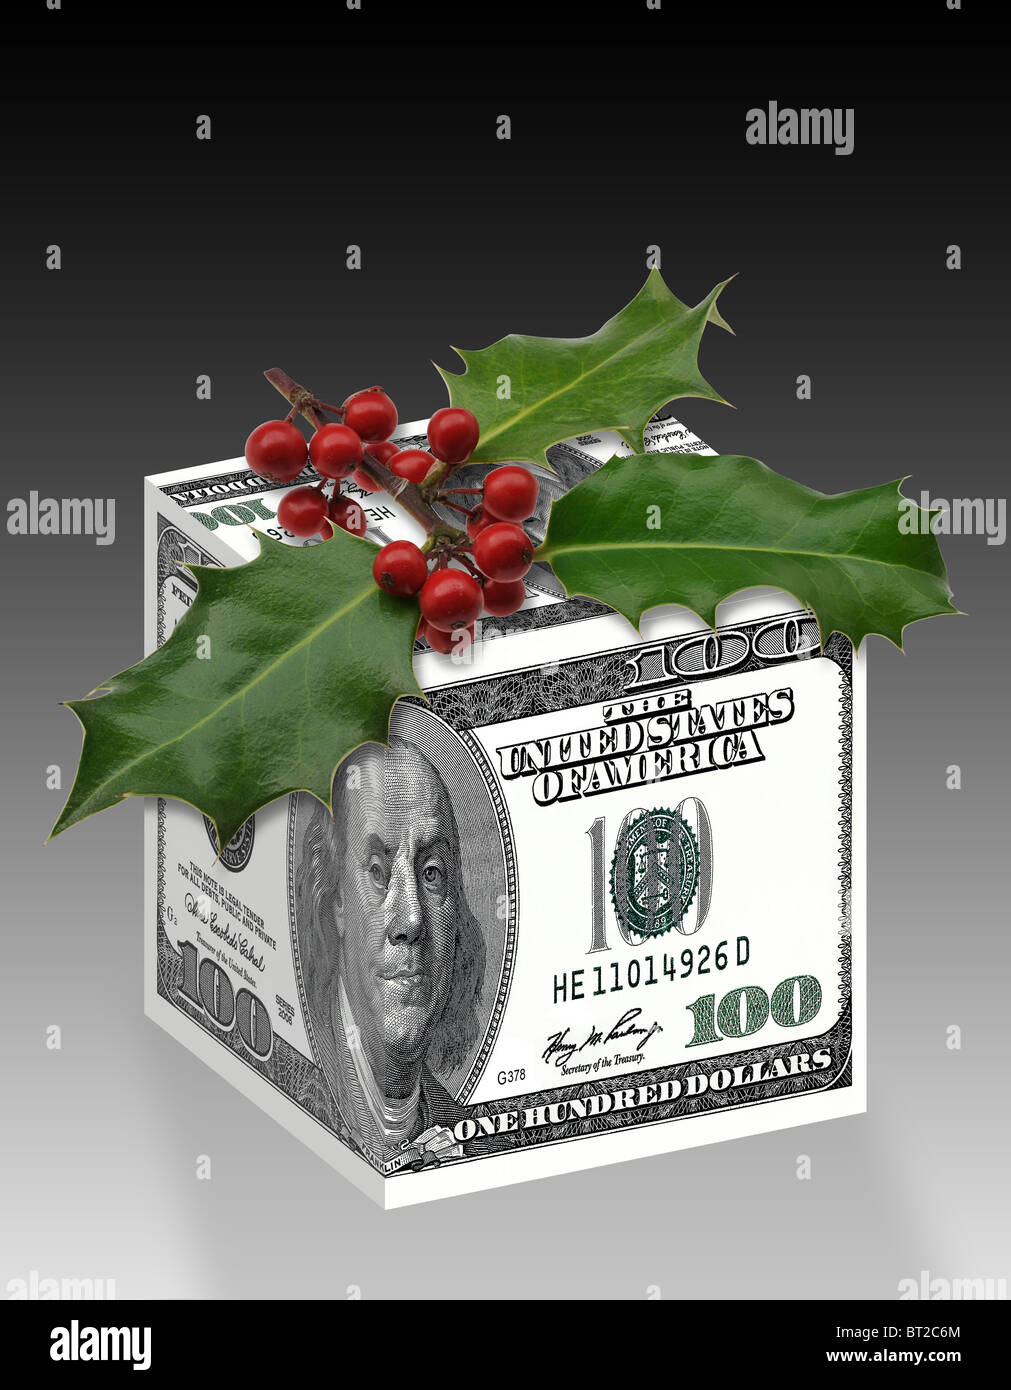 U. S. Dollar money gift box wrapped up with $100 notes with Christmas holly on top. Stock Photo